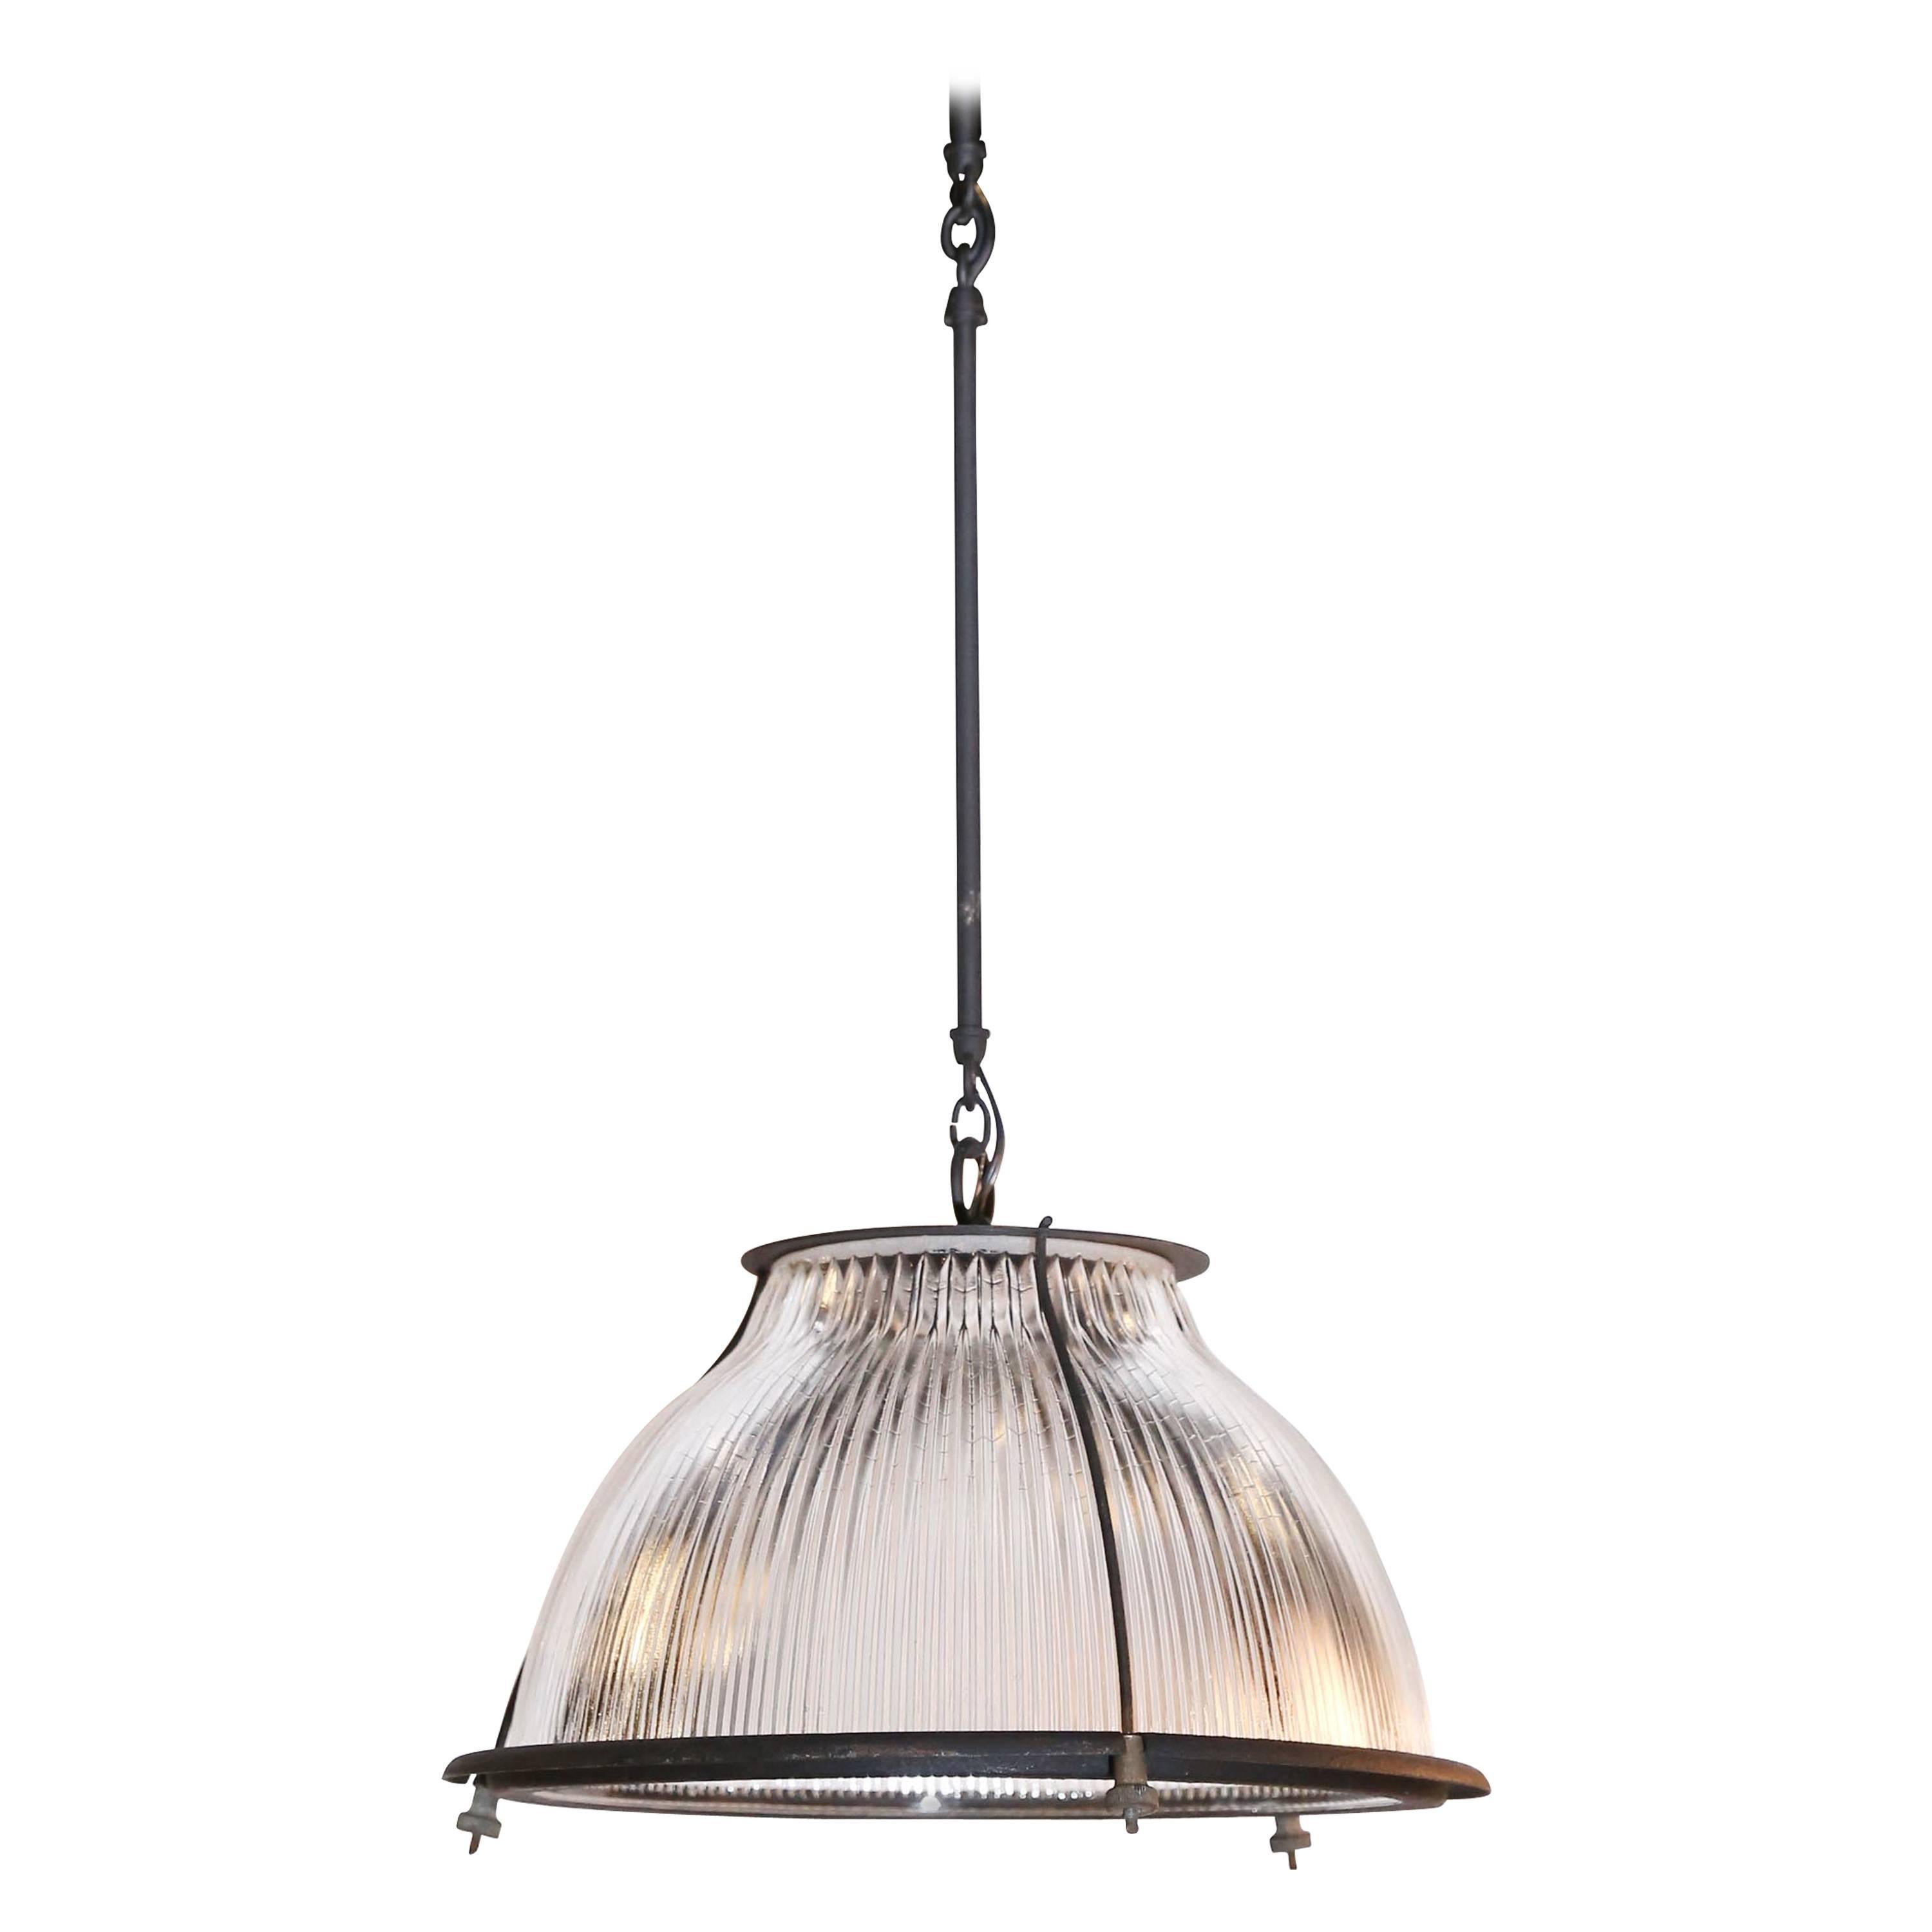 Glass and Metal Industrial Pendant Light Fixture